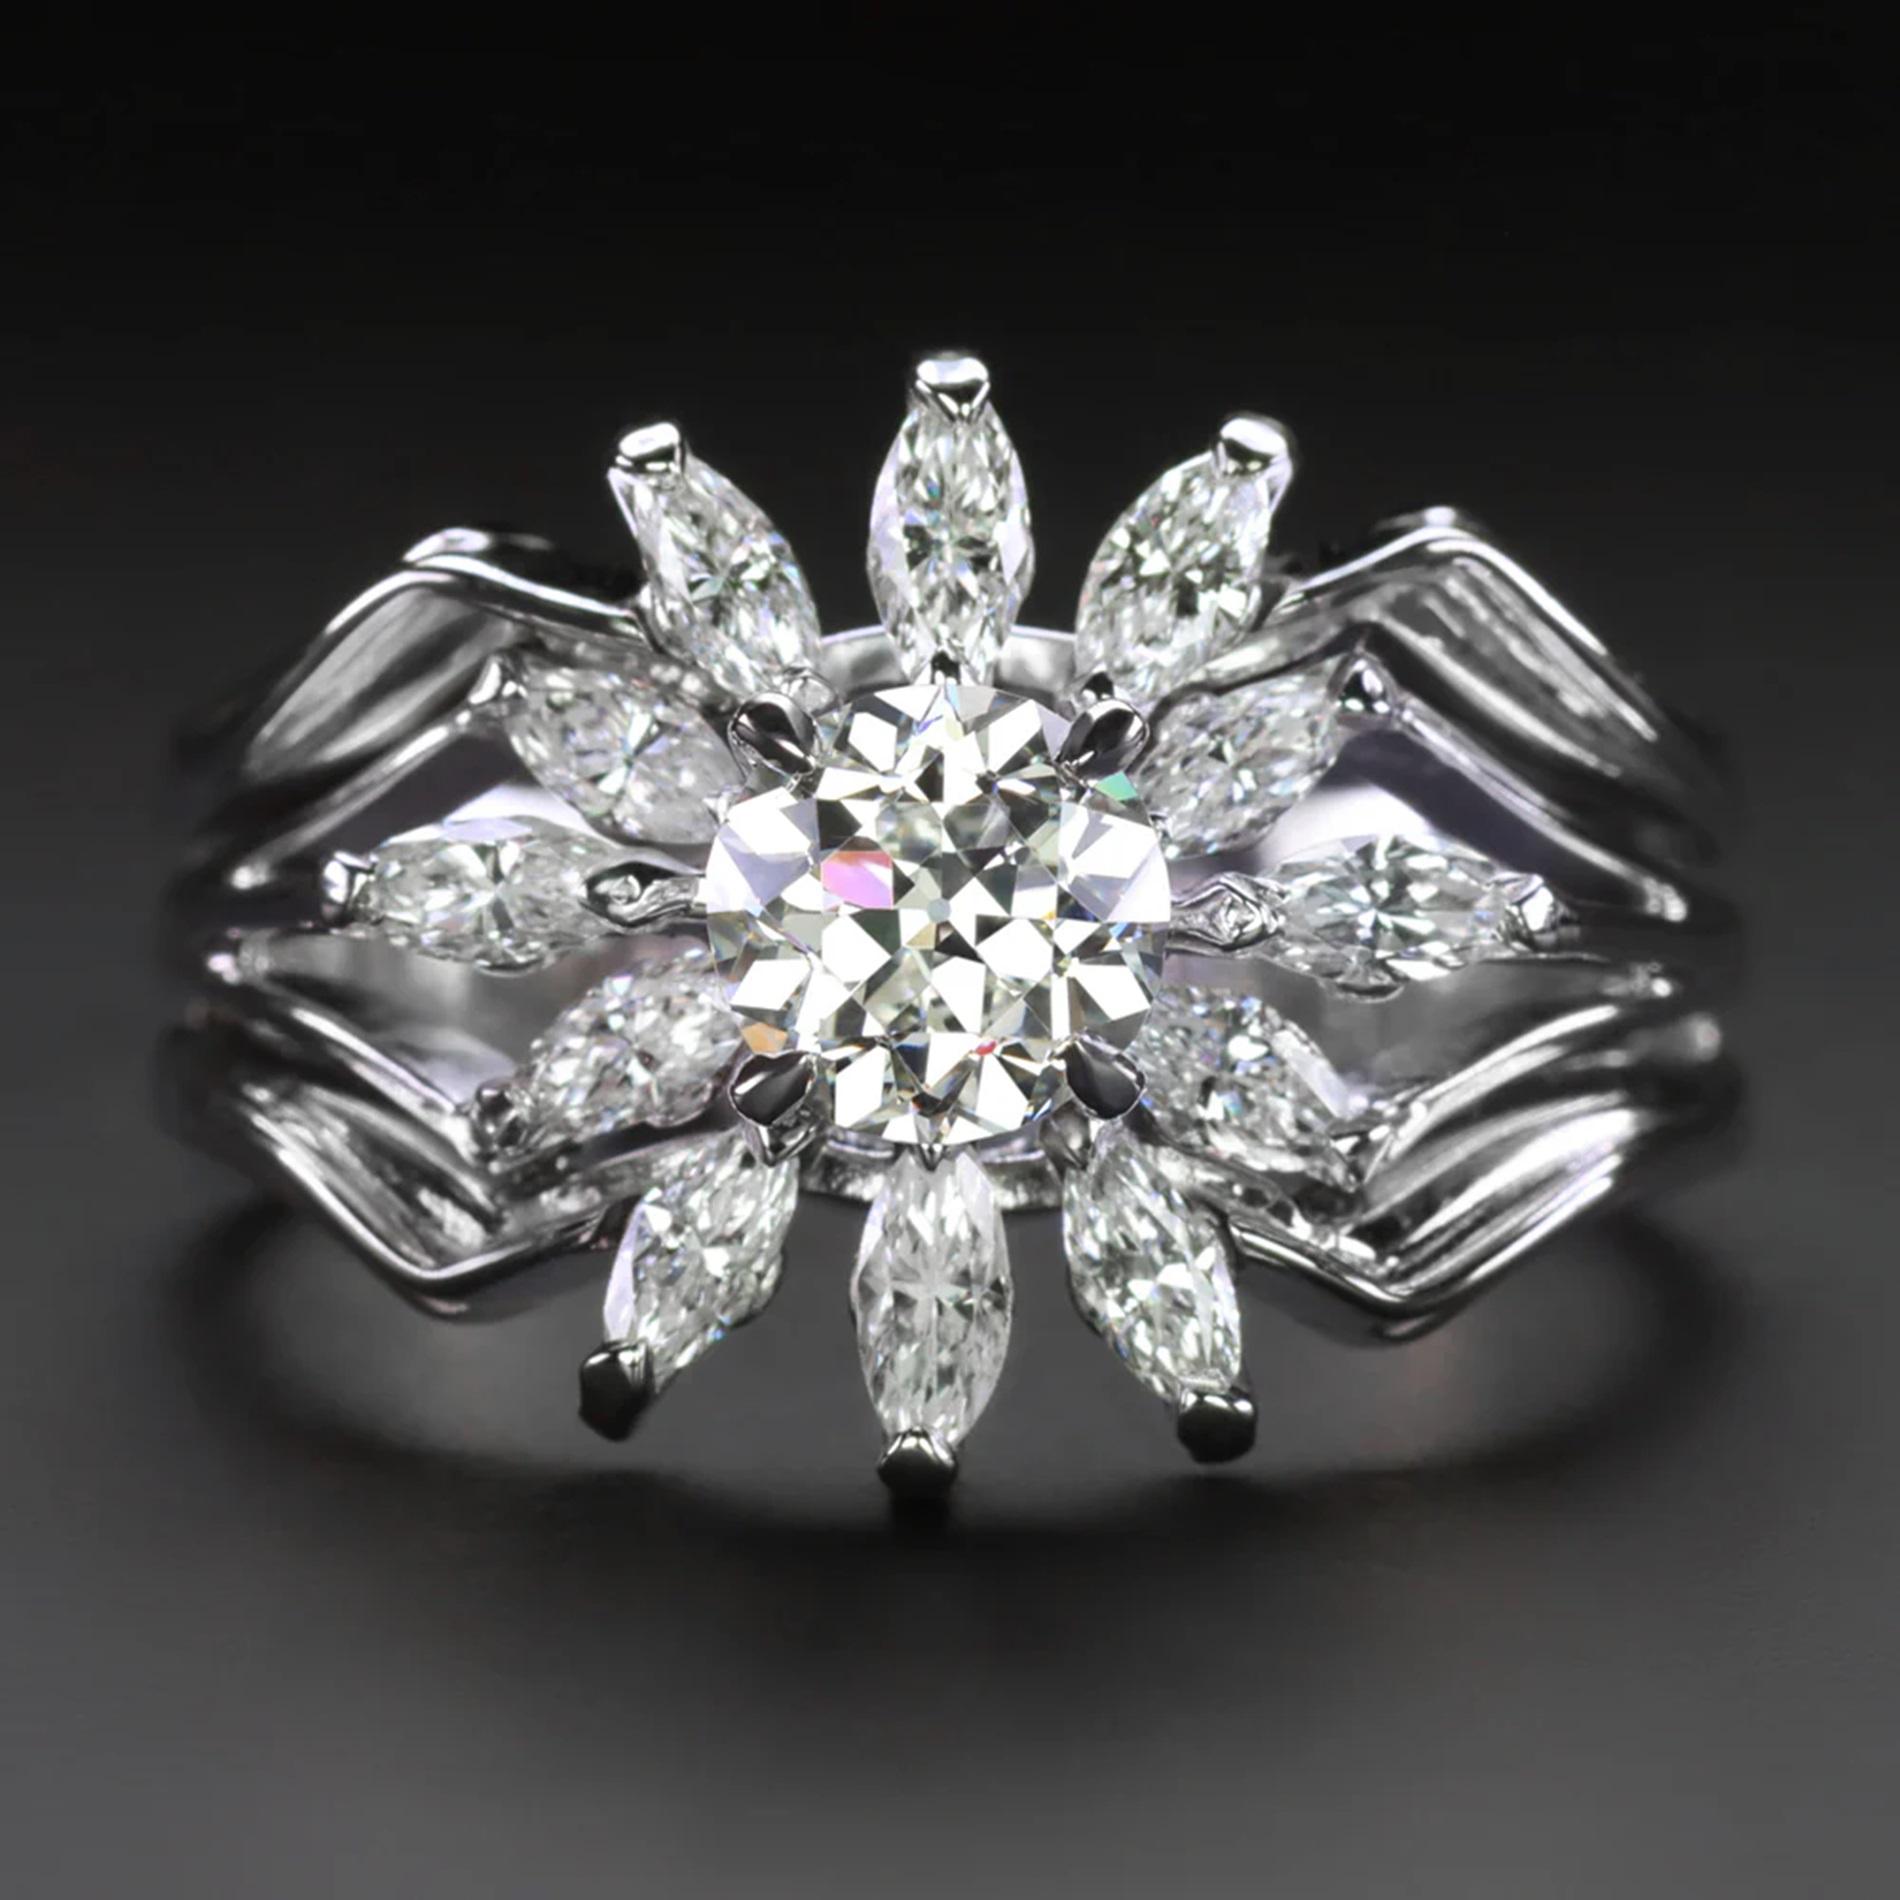 Presenting a captivating vintage diamond ring that boasts an enchanting old European cut diamond at its center, embraced by a halo of exquisite marquise-cut diamonds.

Highlighted features include:

An original vintage old European cut diamond